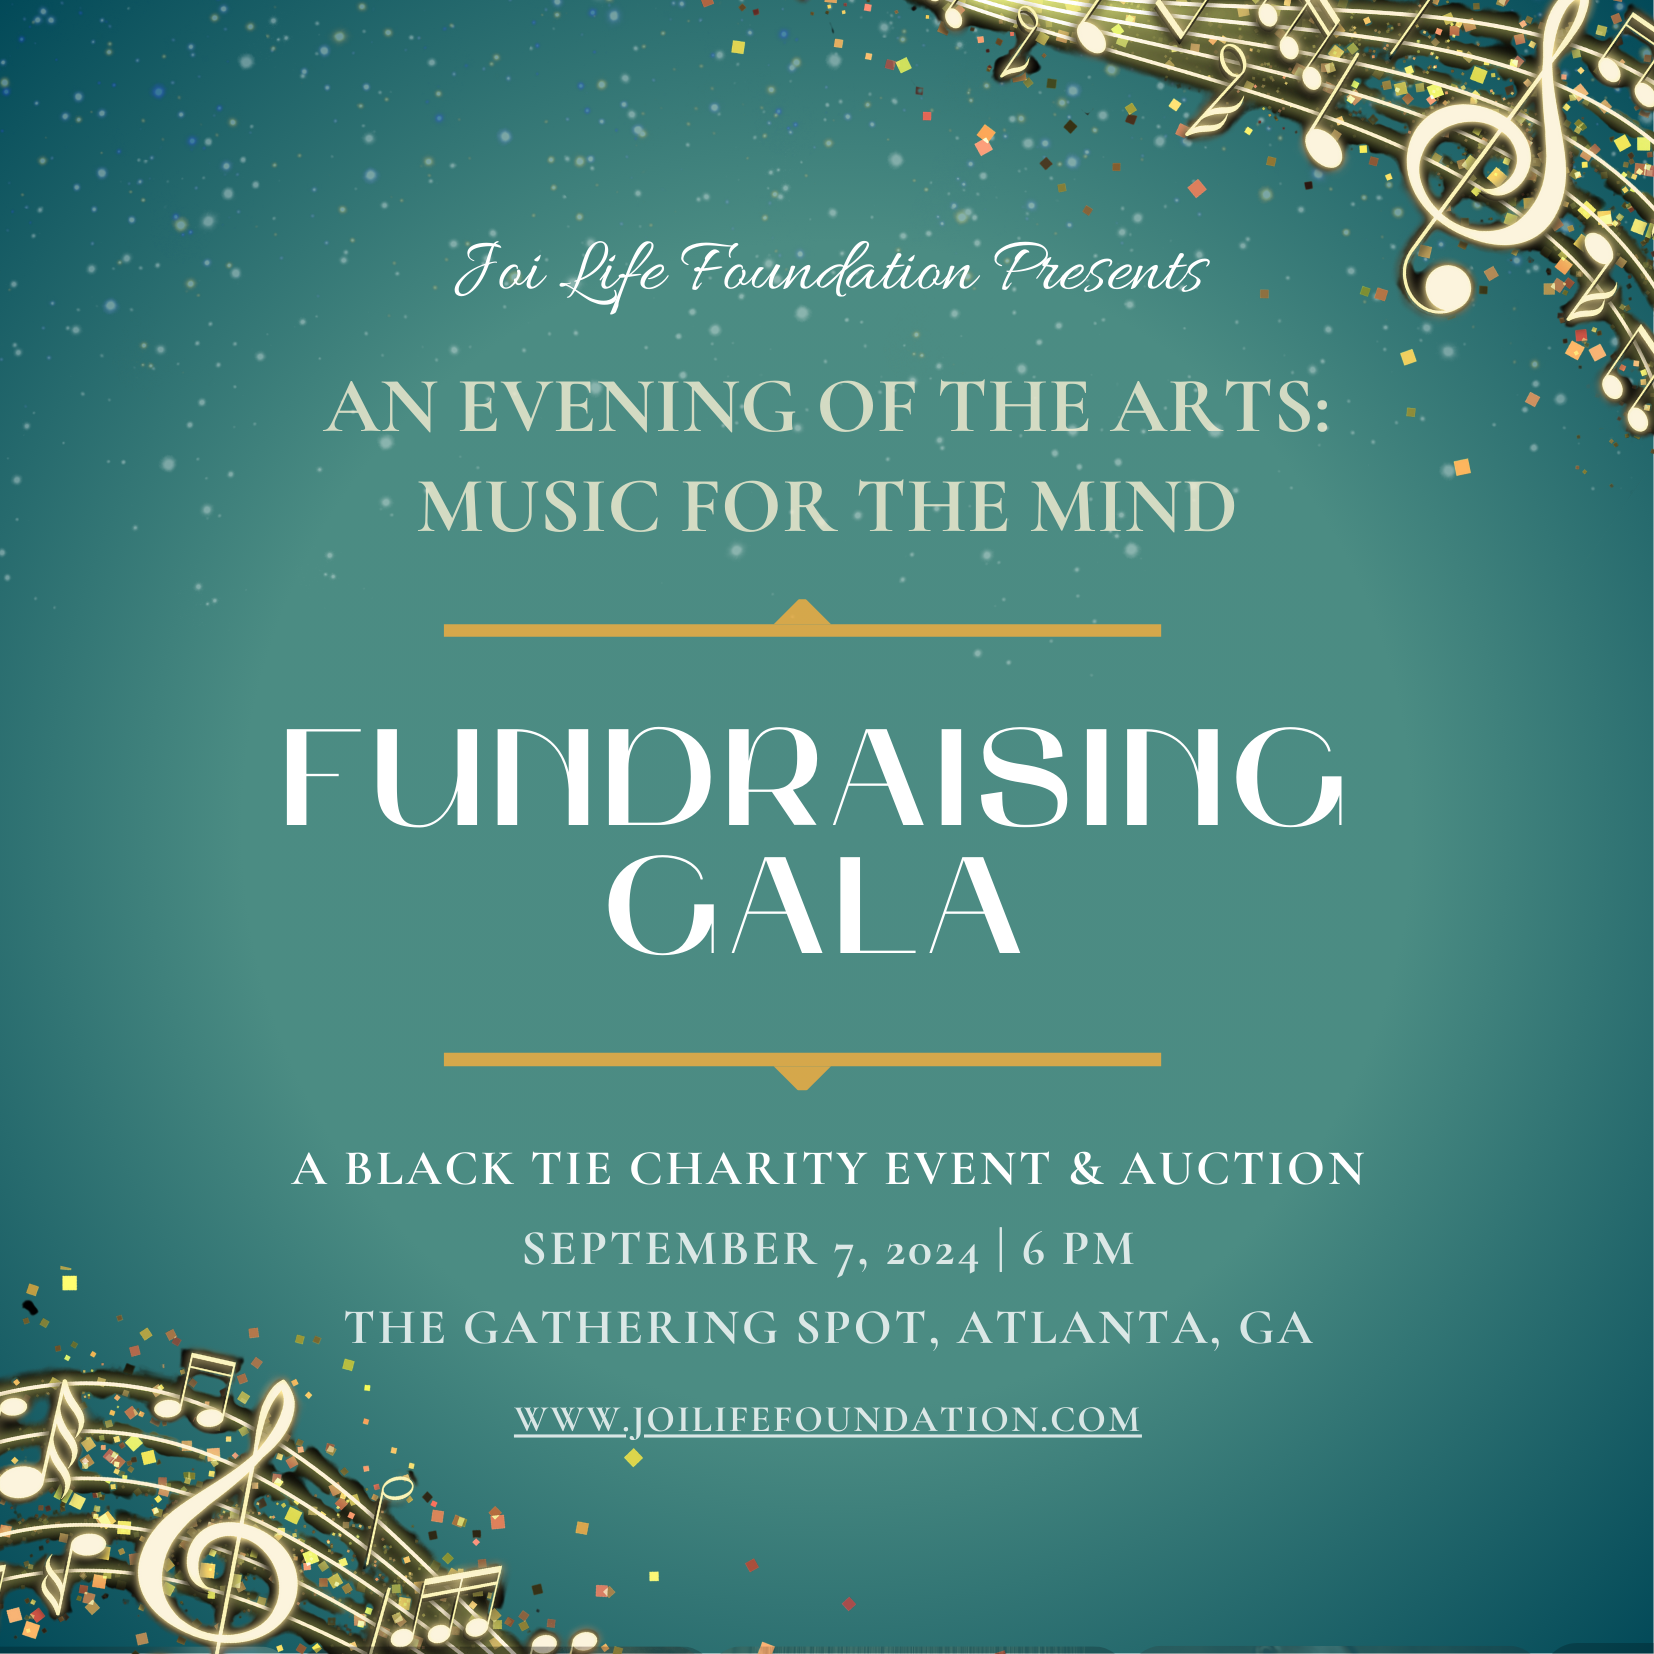 An Evening of the Arts: Music for the Mind Gala Saturday, September 7, 2024